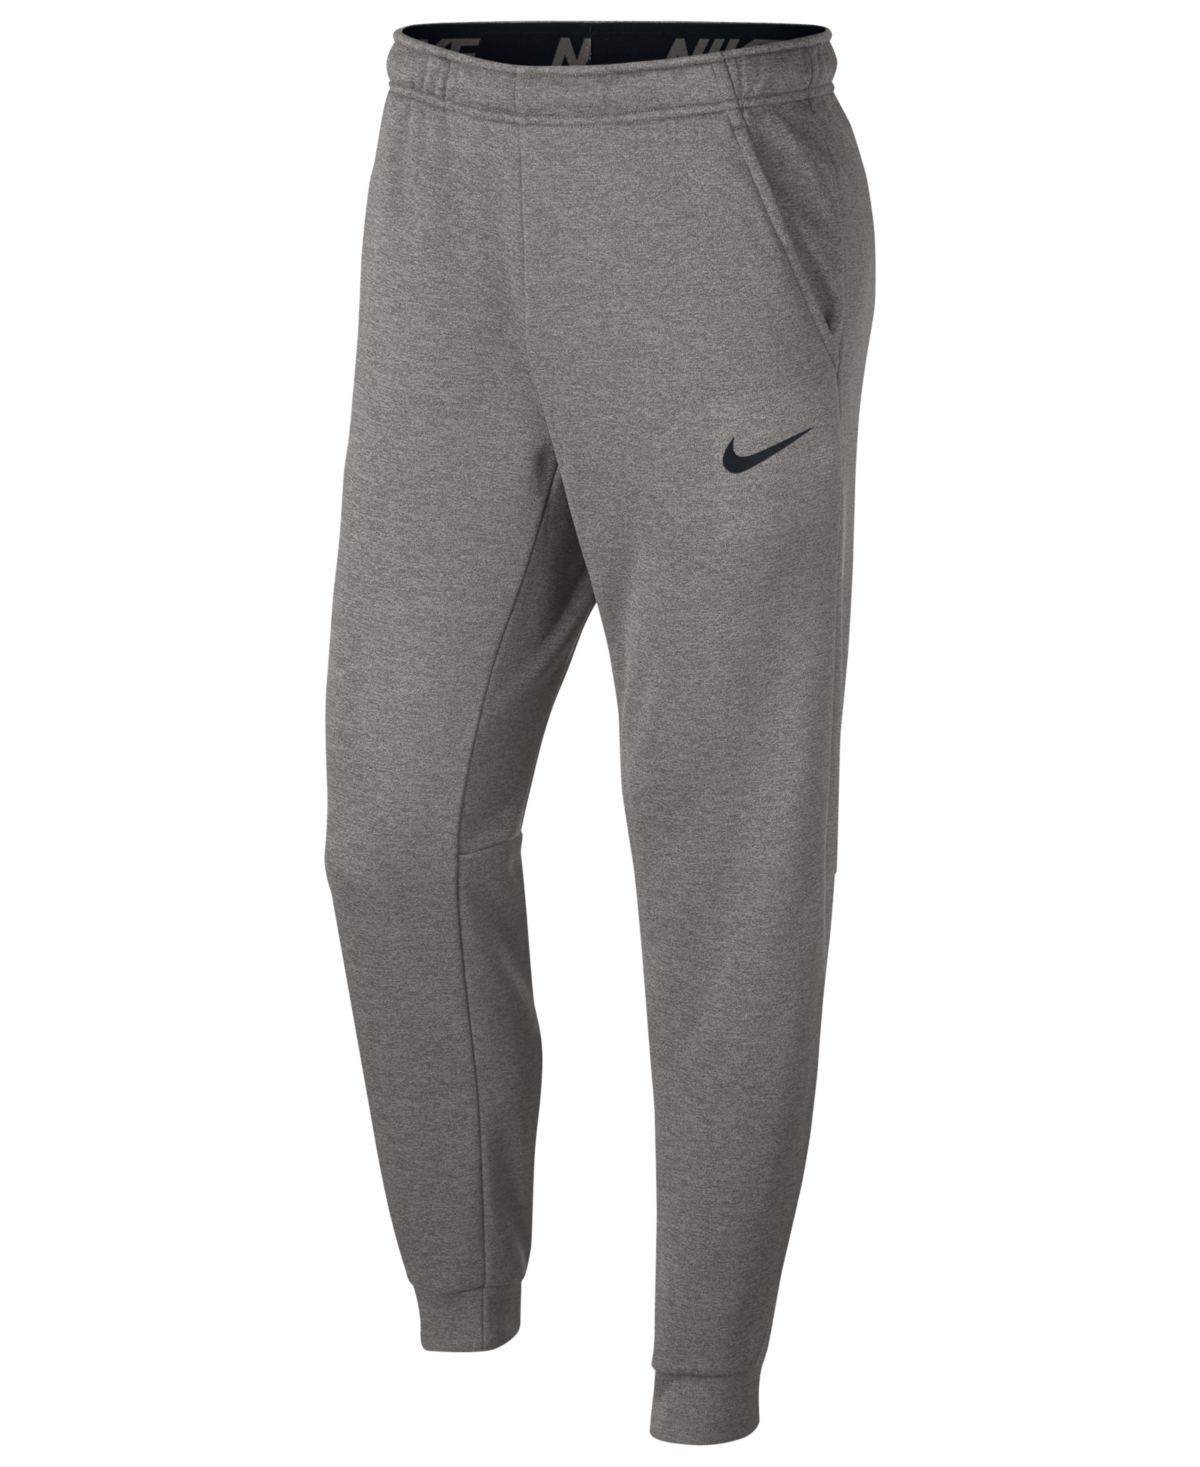 UPC 886668340401 product image for Nike Men's Therma Tapered Training Pants | upcitemdb.com